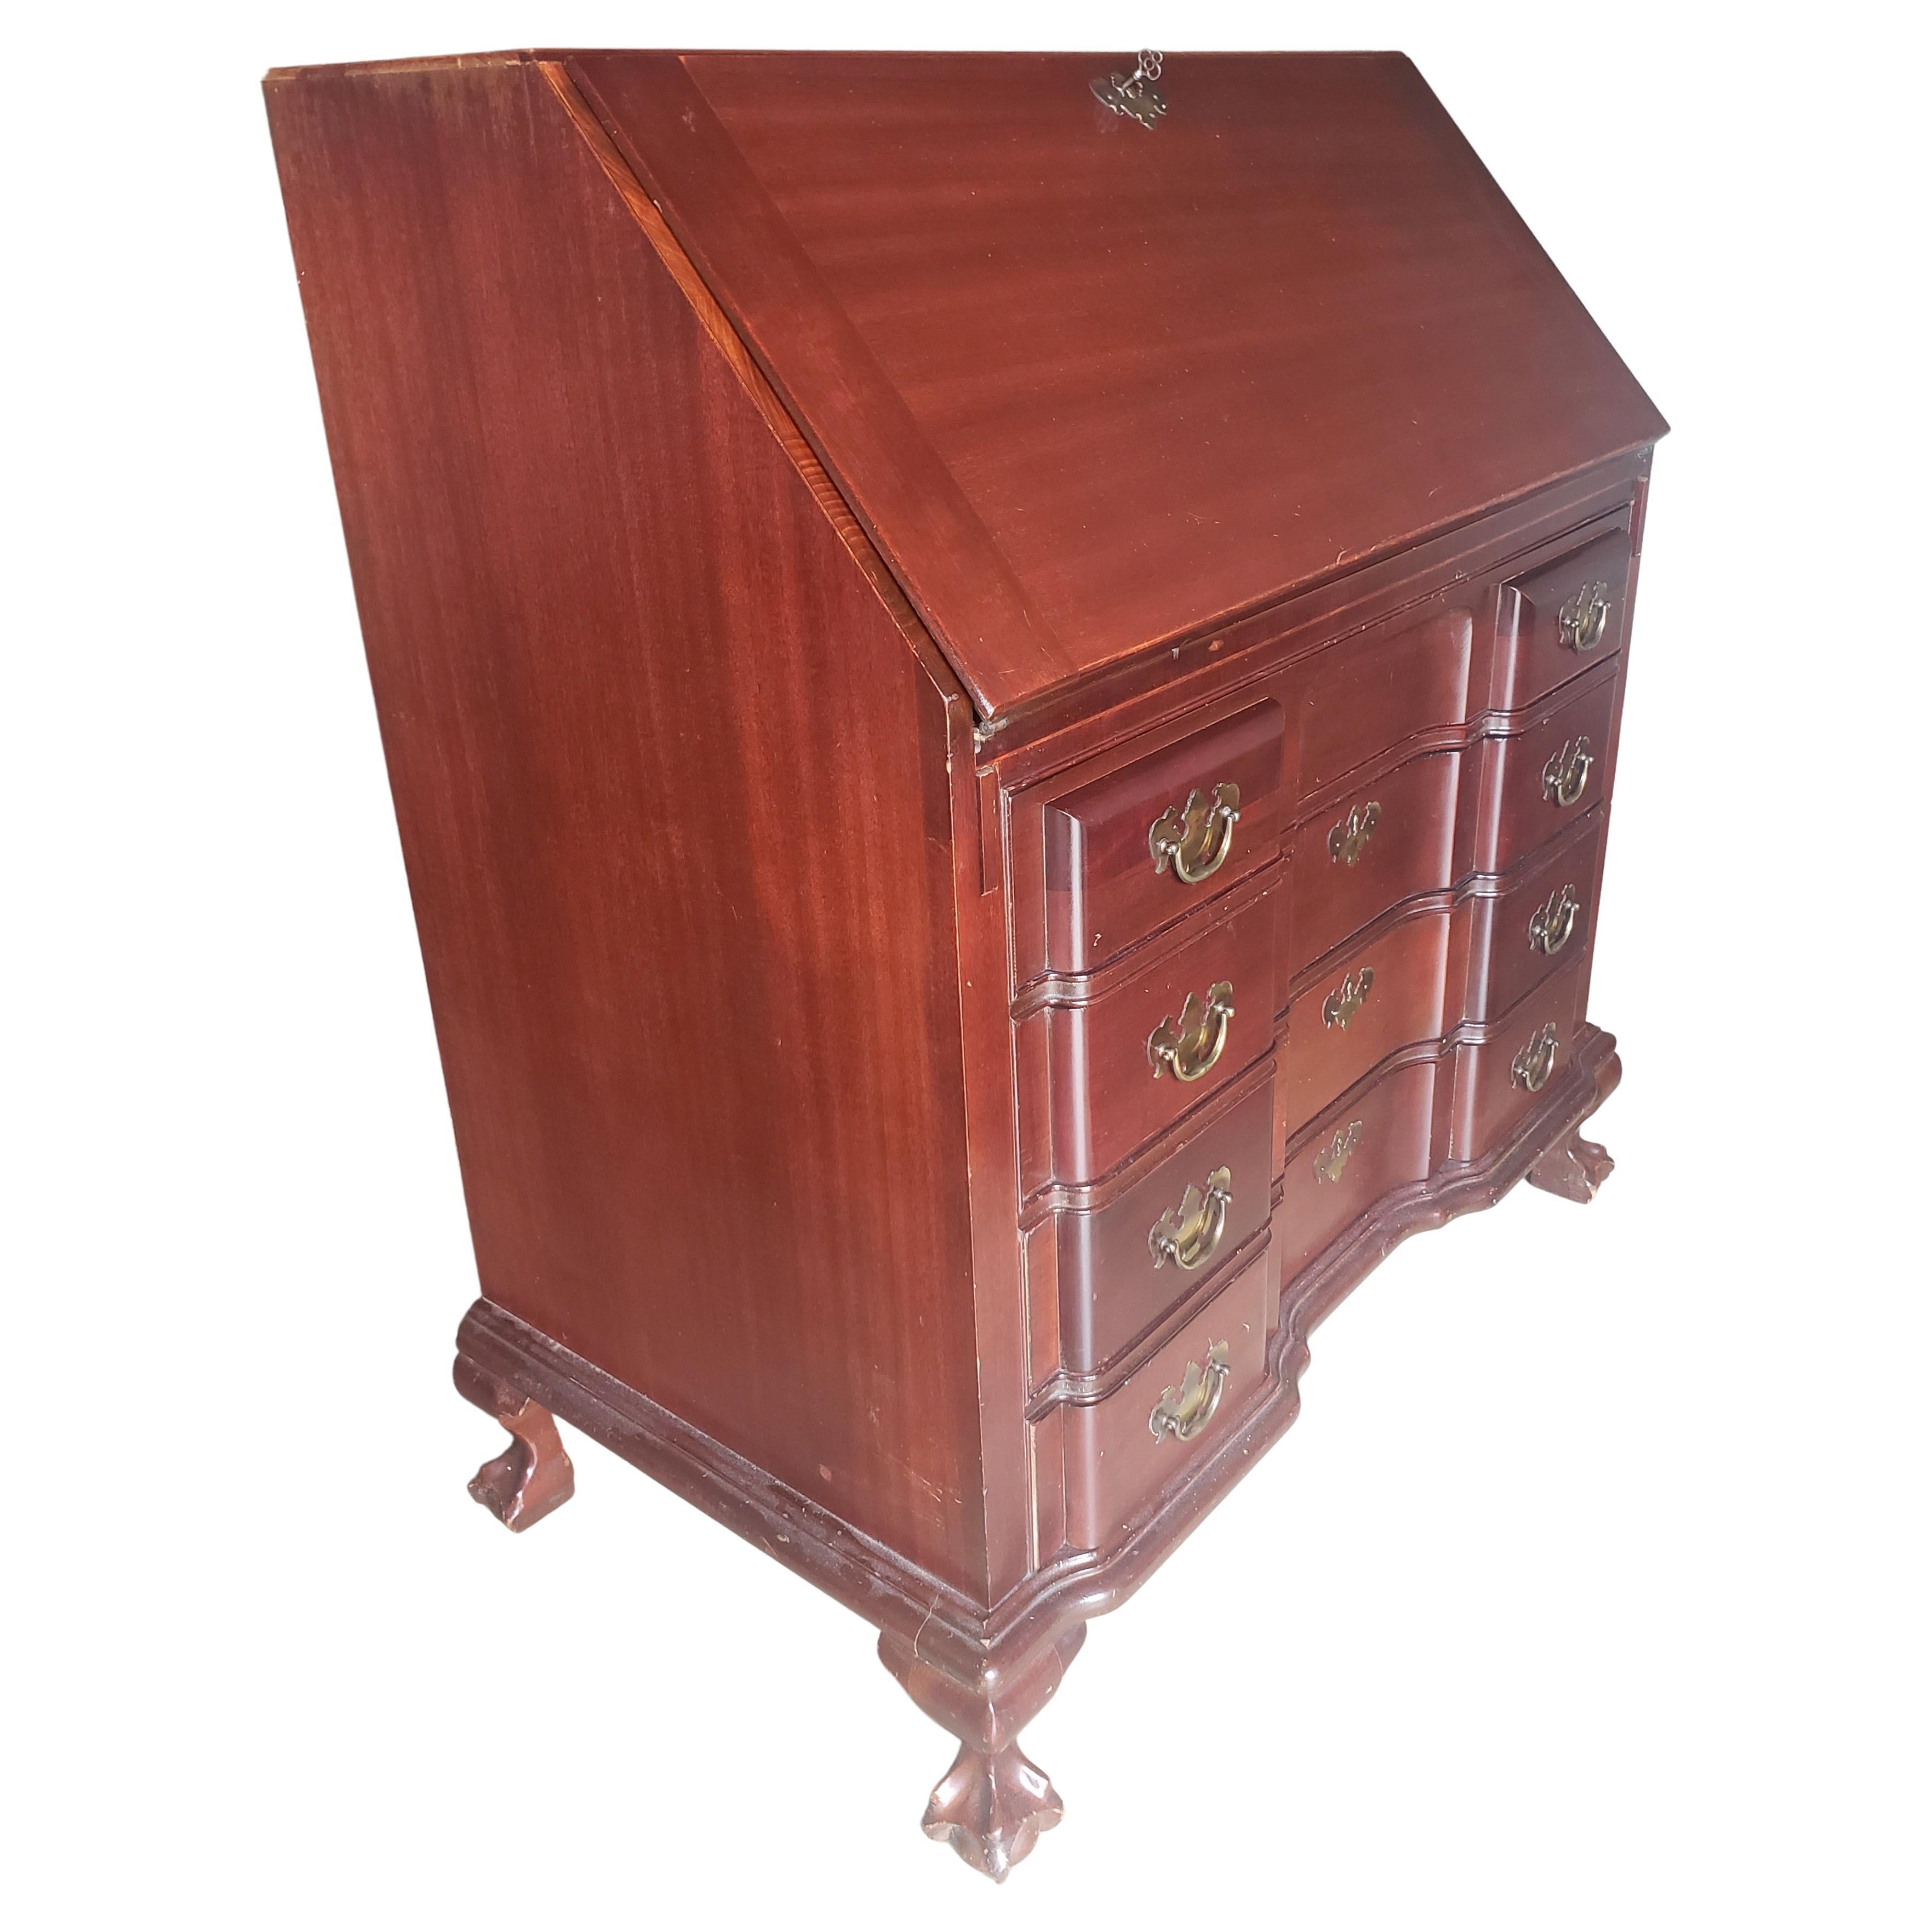 A refinished Maddox Red Mahogany Chippendale Block front,  Slant Front Secratary Desk with Key. Desk door locks, along with the three lower drawers. All drawers work as originally intended and are all dovetail joints constructed. Very clean vintage